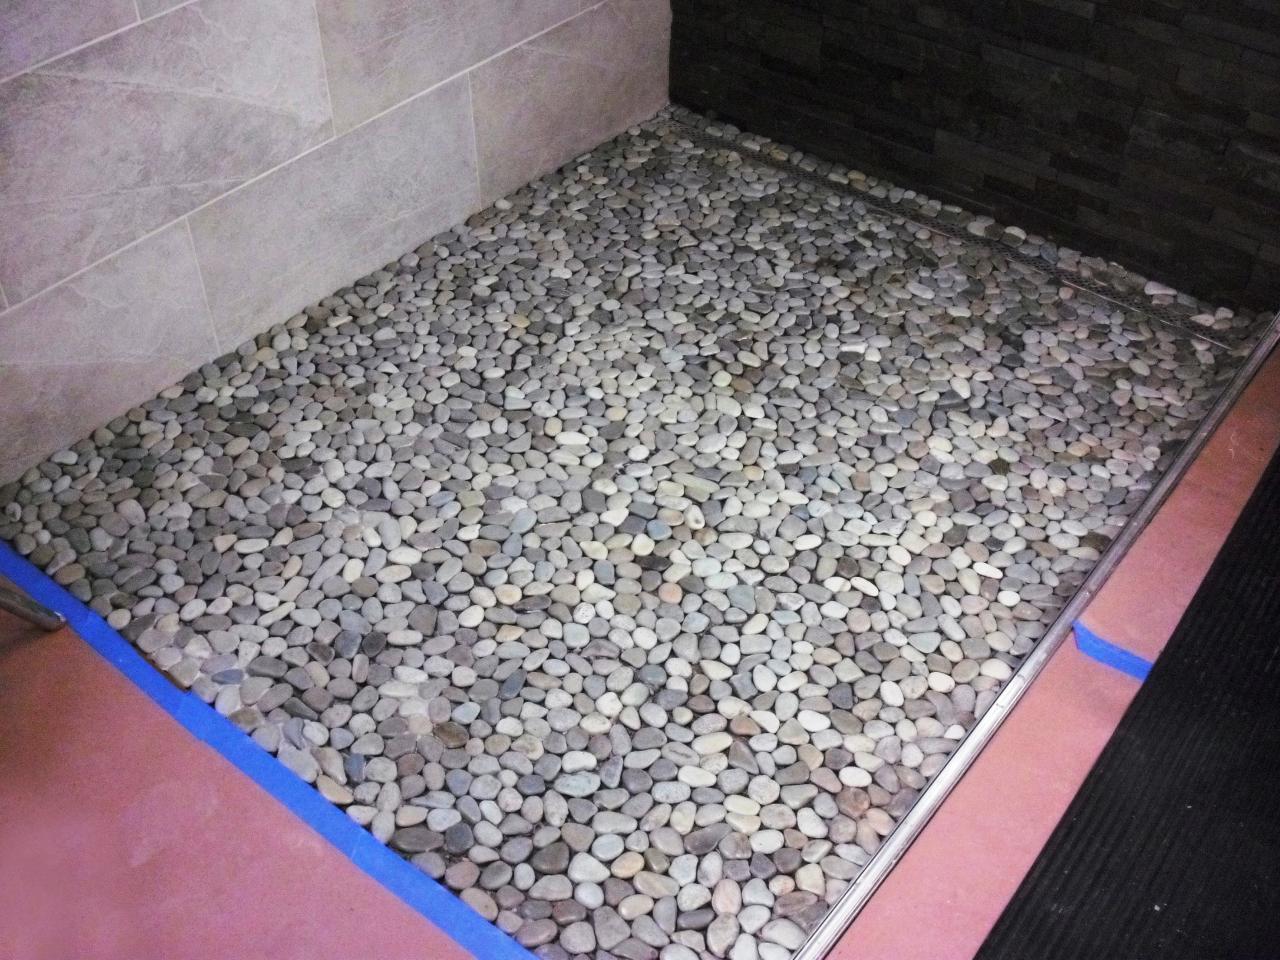 How To Lay A Pebble Tile Floor, How To Grout A Pebble Shower Floor